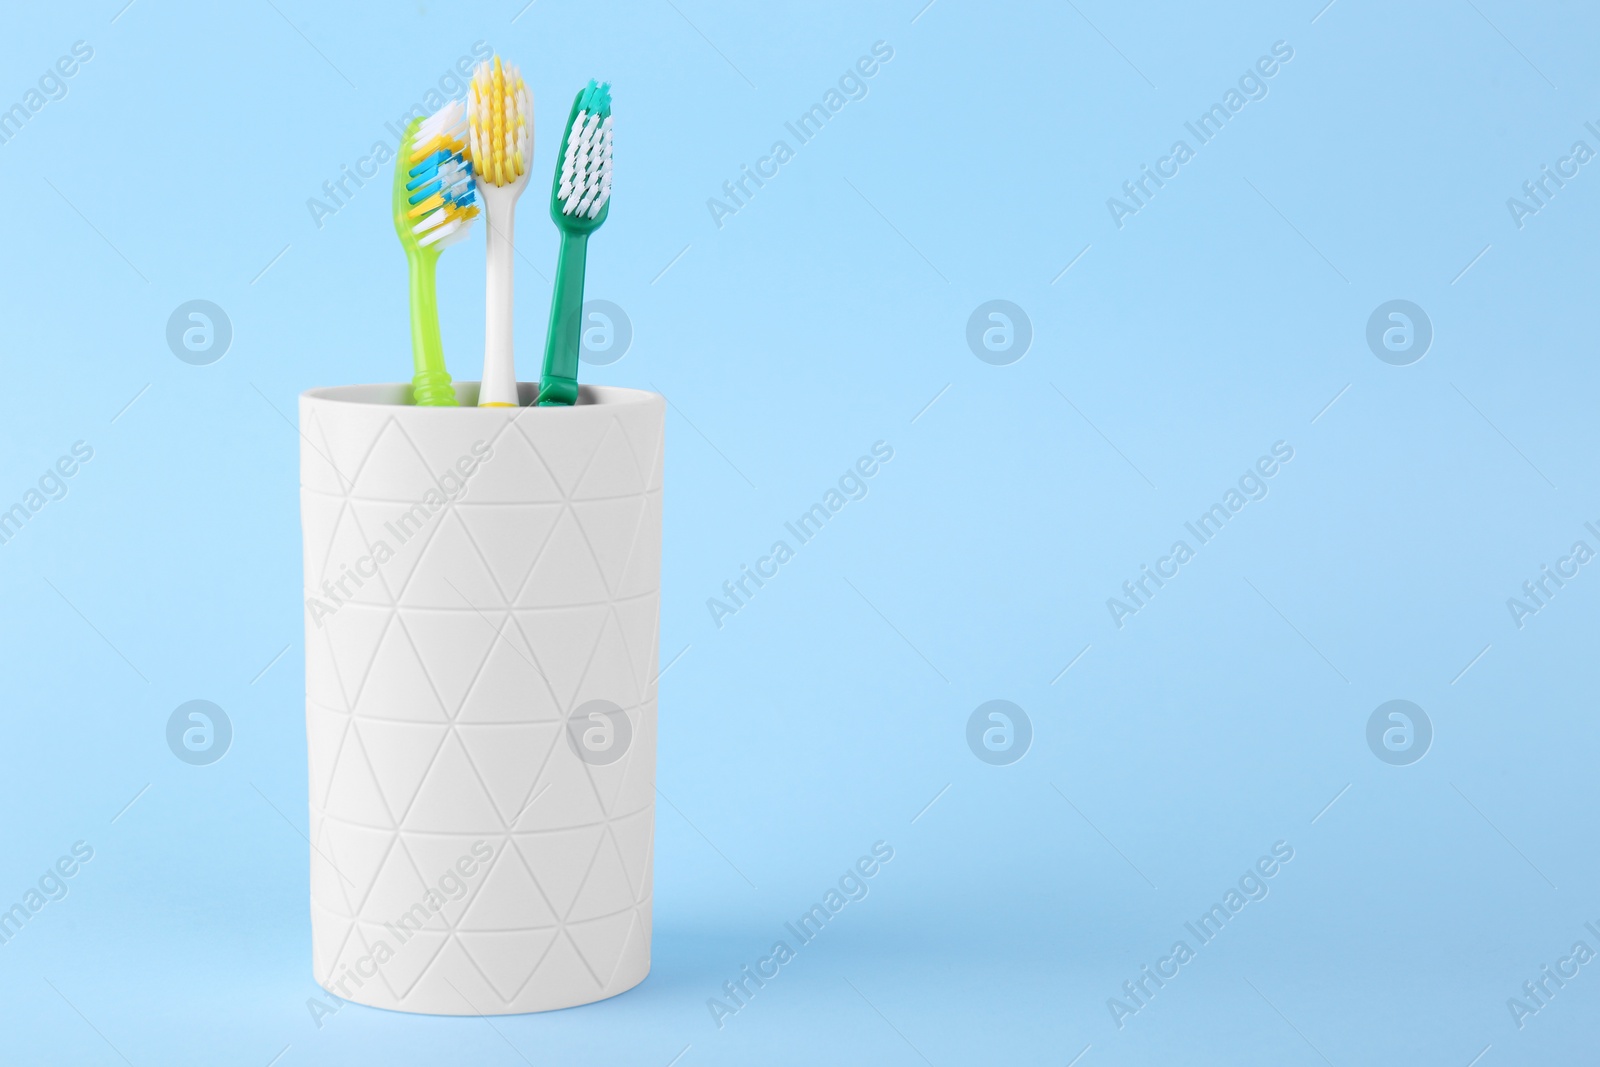 Photo of Different toothbrushes in holder on light blue background. Space for text